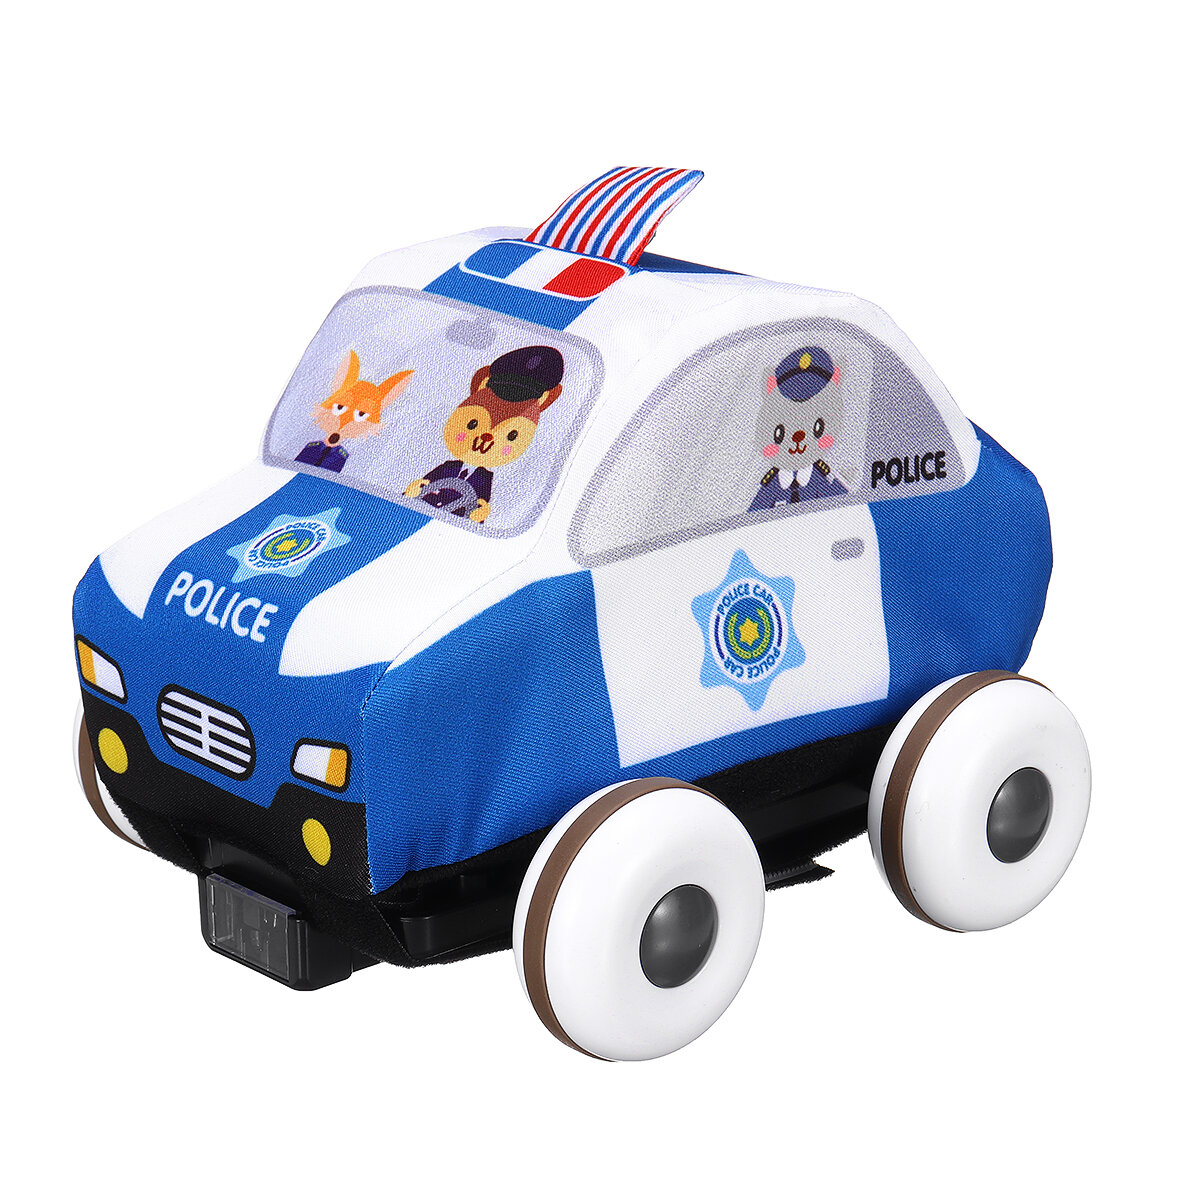 6pcs/box School Bus Fire Truck Ambulance Police Car With Crawling Mat Toys Model for Children Christmas Gifts